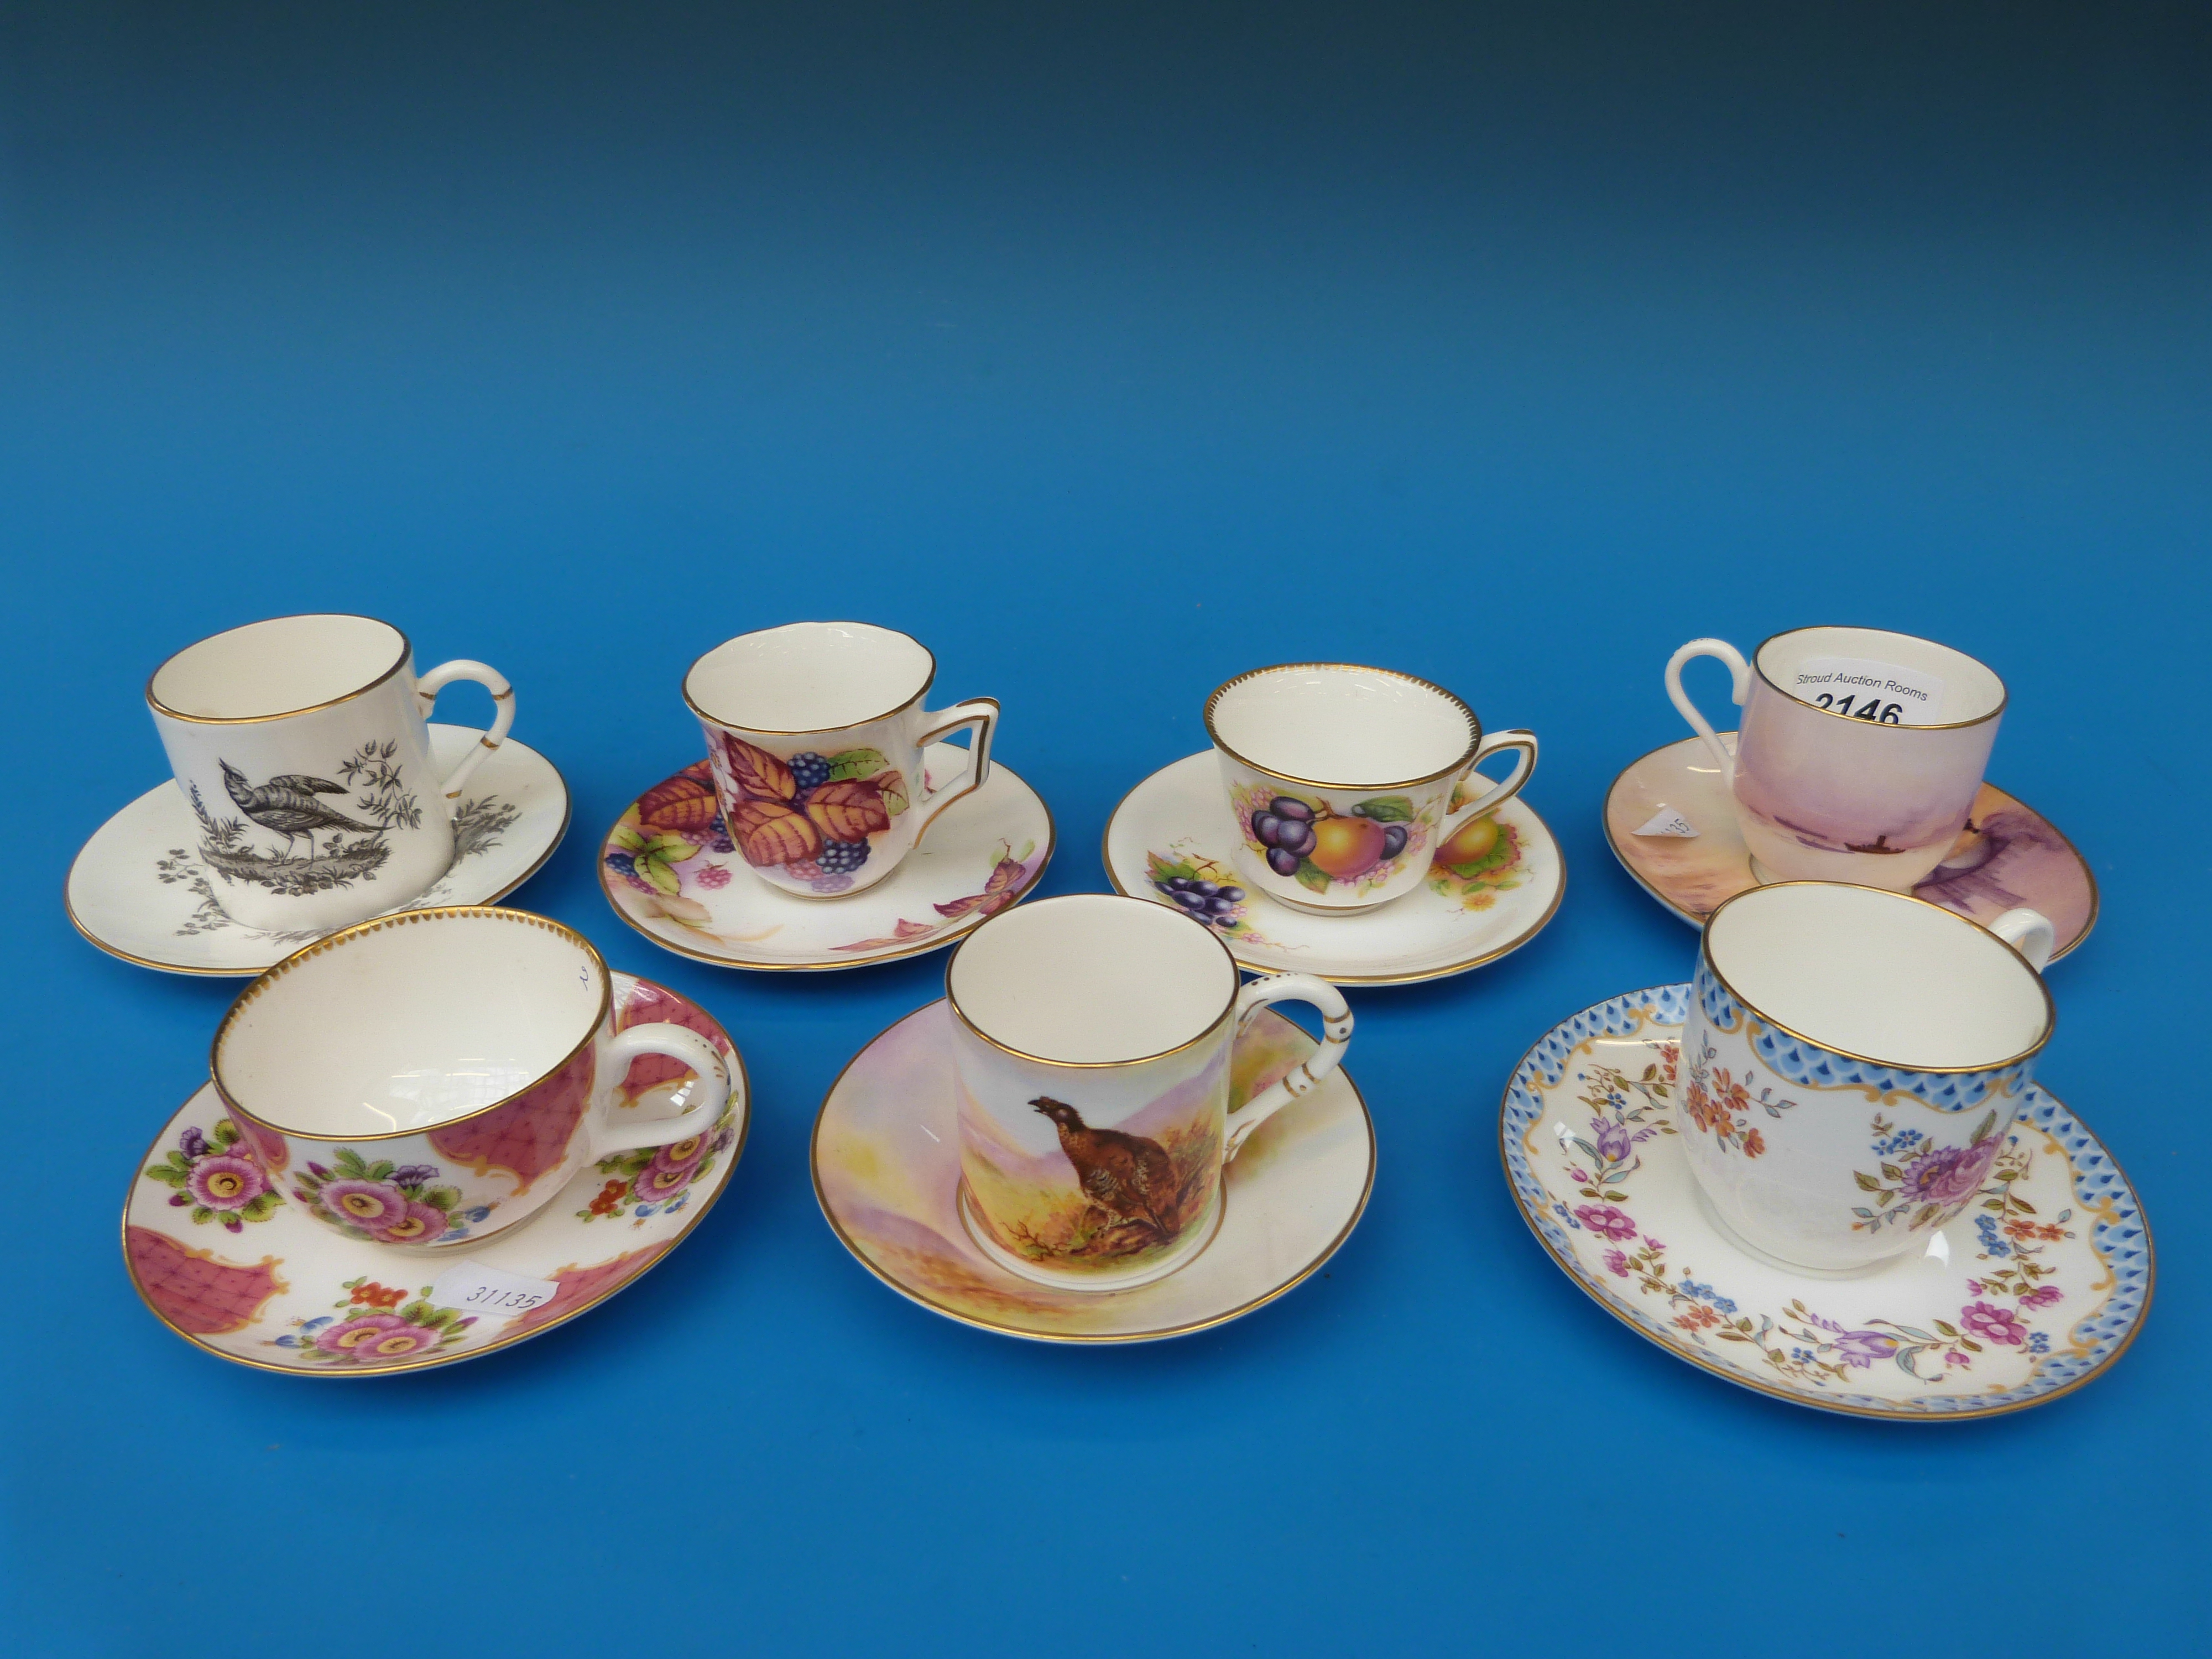 A large quantity of Royal Worcester decorative cups and saucers reviving old patterns - Image 2 of 3